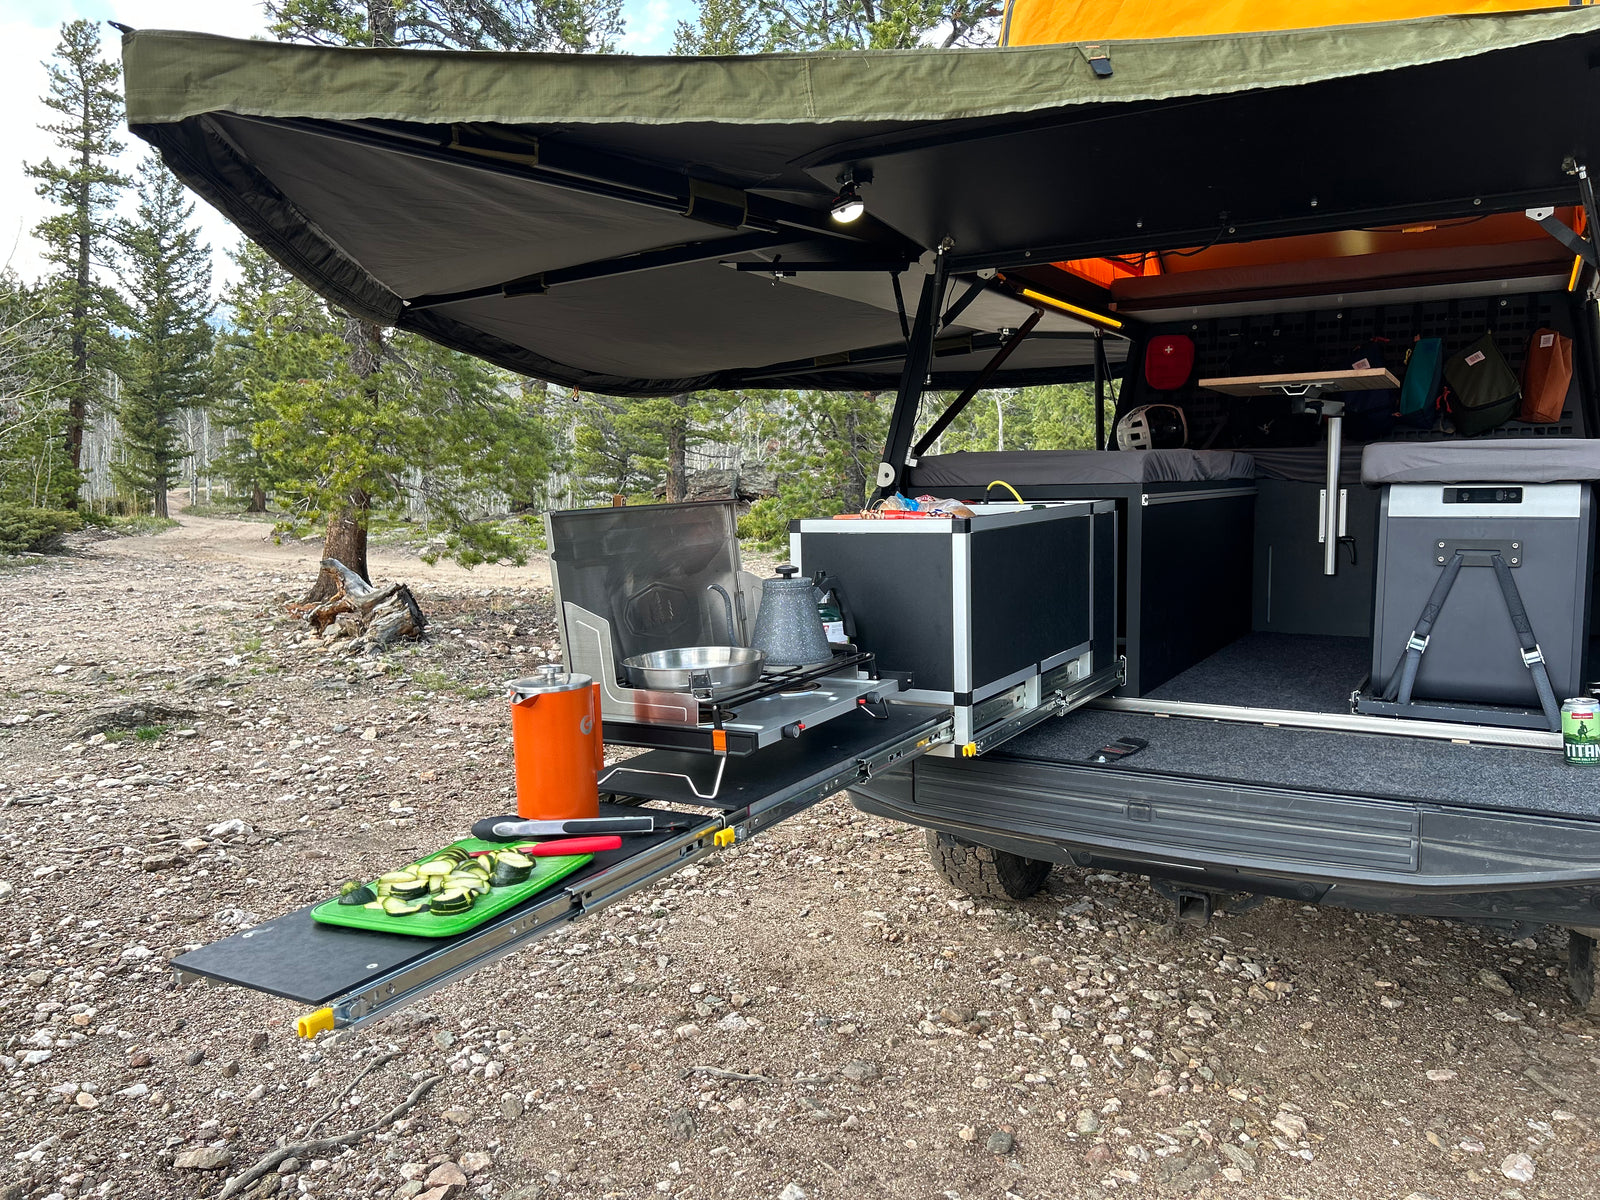 Go Fast Camper (GFC) build - Slide out camp kitchen fully extended with GSI Pinnacle cooktop